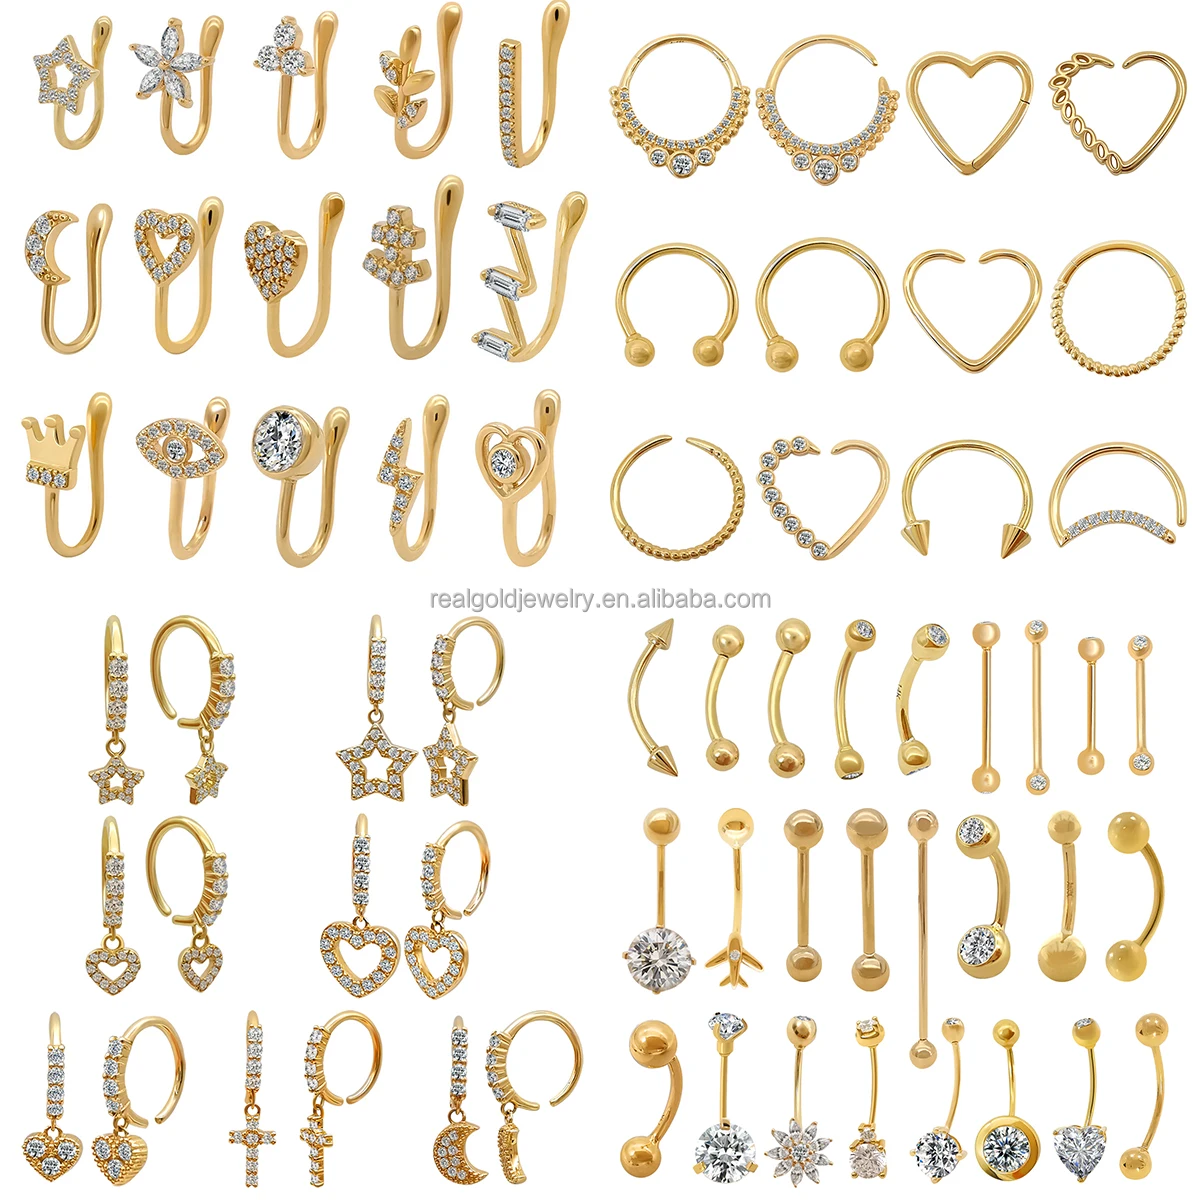 

Newest Trendy 14K Au585 Yellow Real Gold Different Shape Nose Ring Variety of Styles with CZ Piercing Fine Jewelry Customized